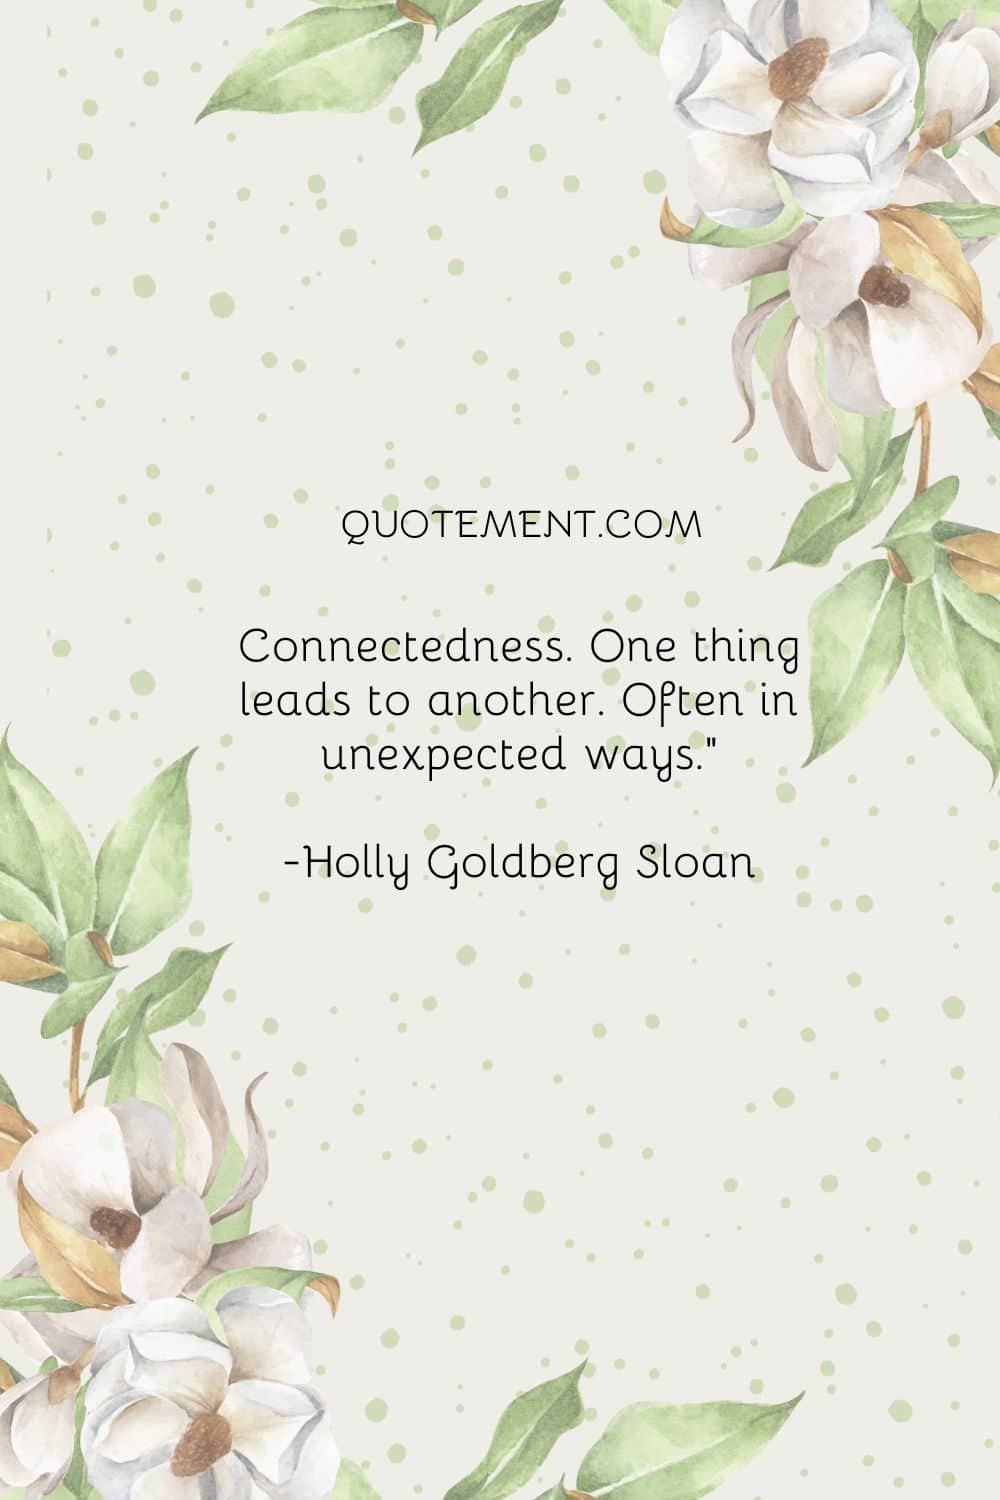 Connectedness. One thing leads to another. Often in unexpected ways.